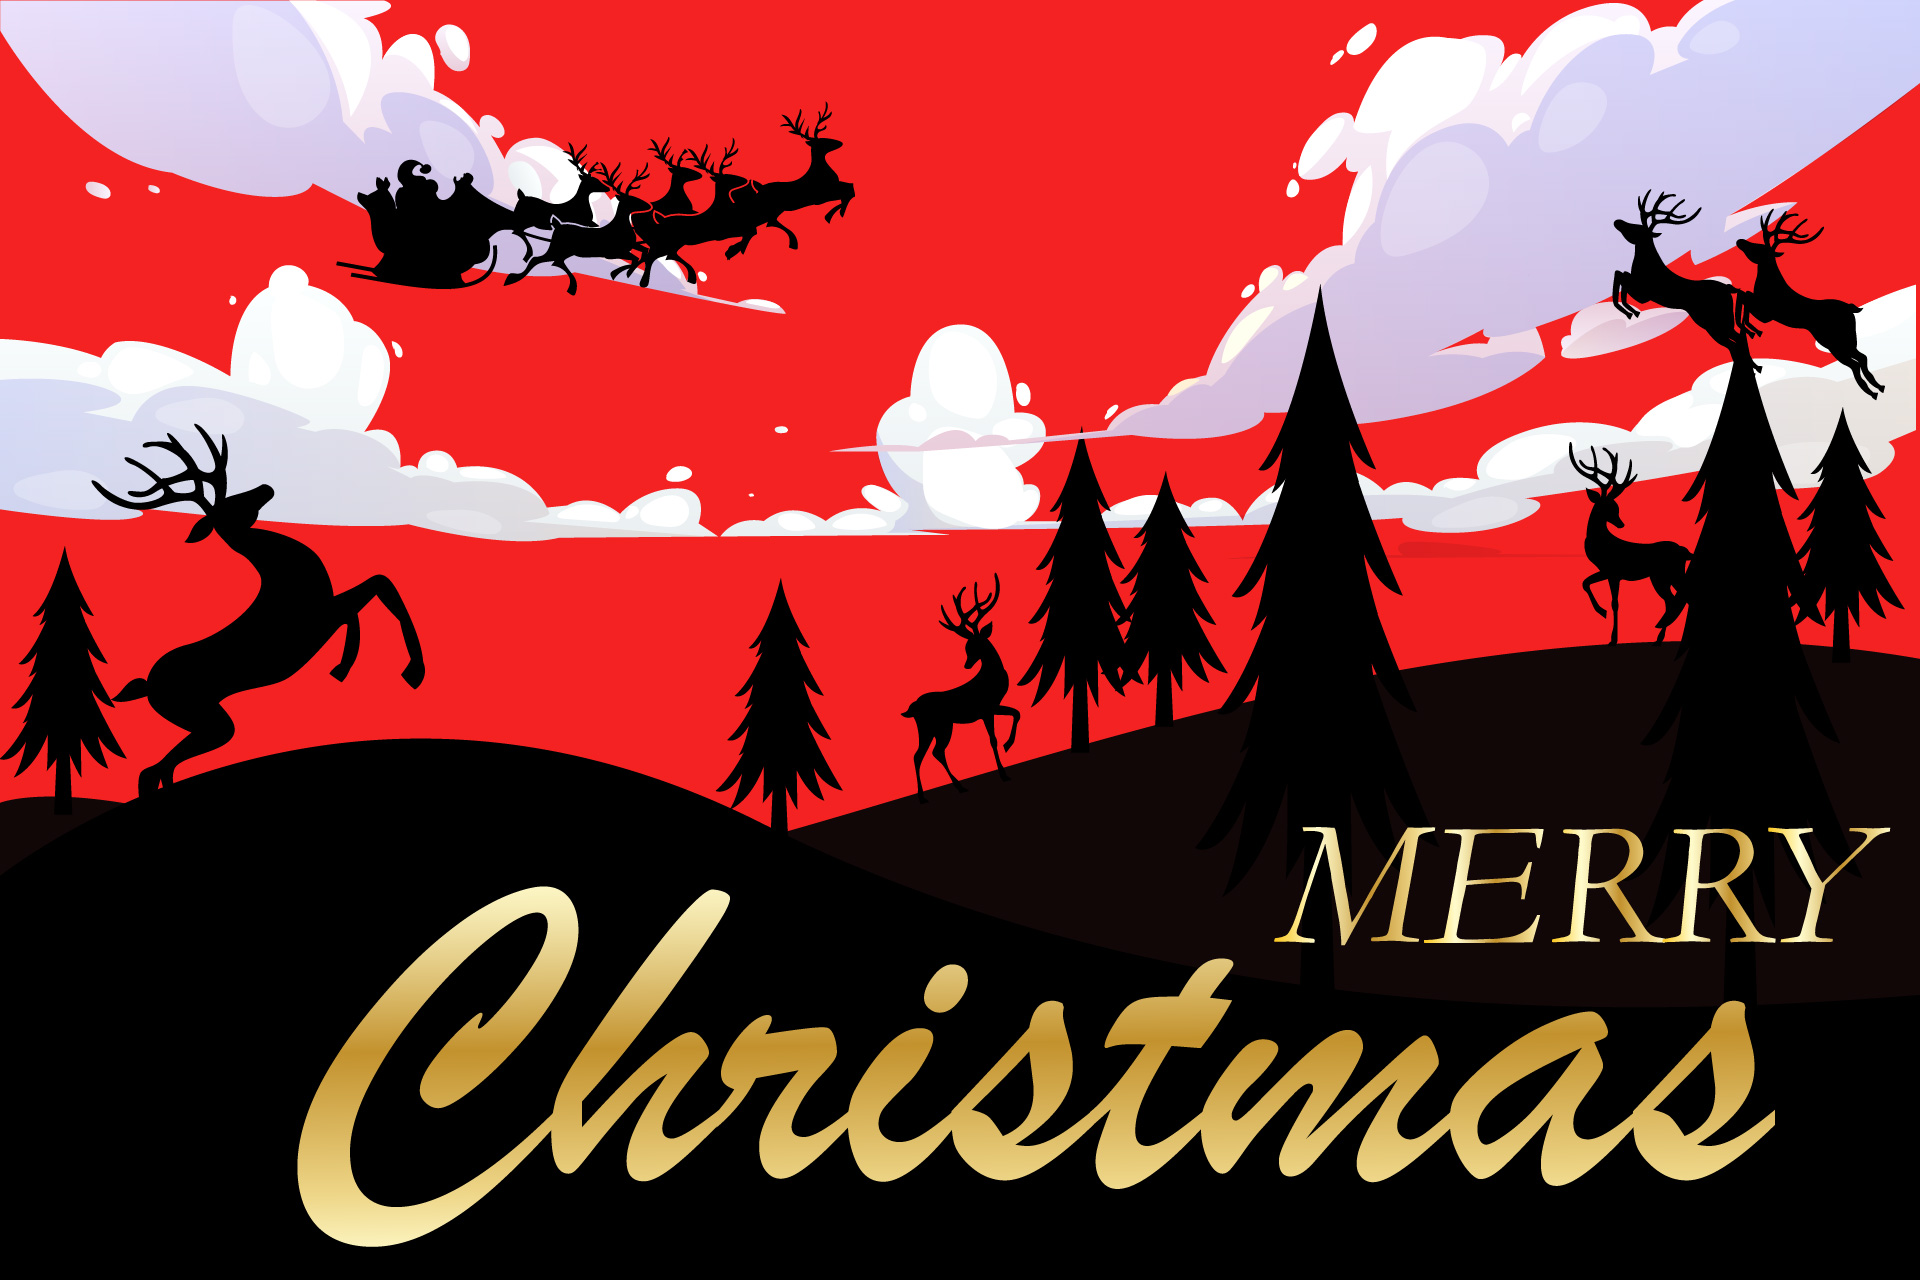 Download Merry Christmas Background Illustration Graphic By Isalnesia Creative Fabrica